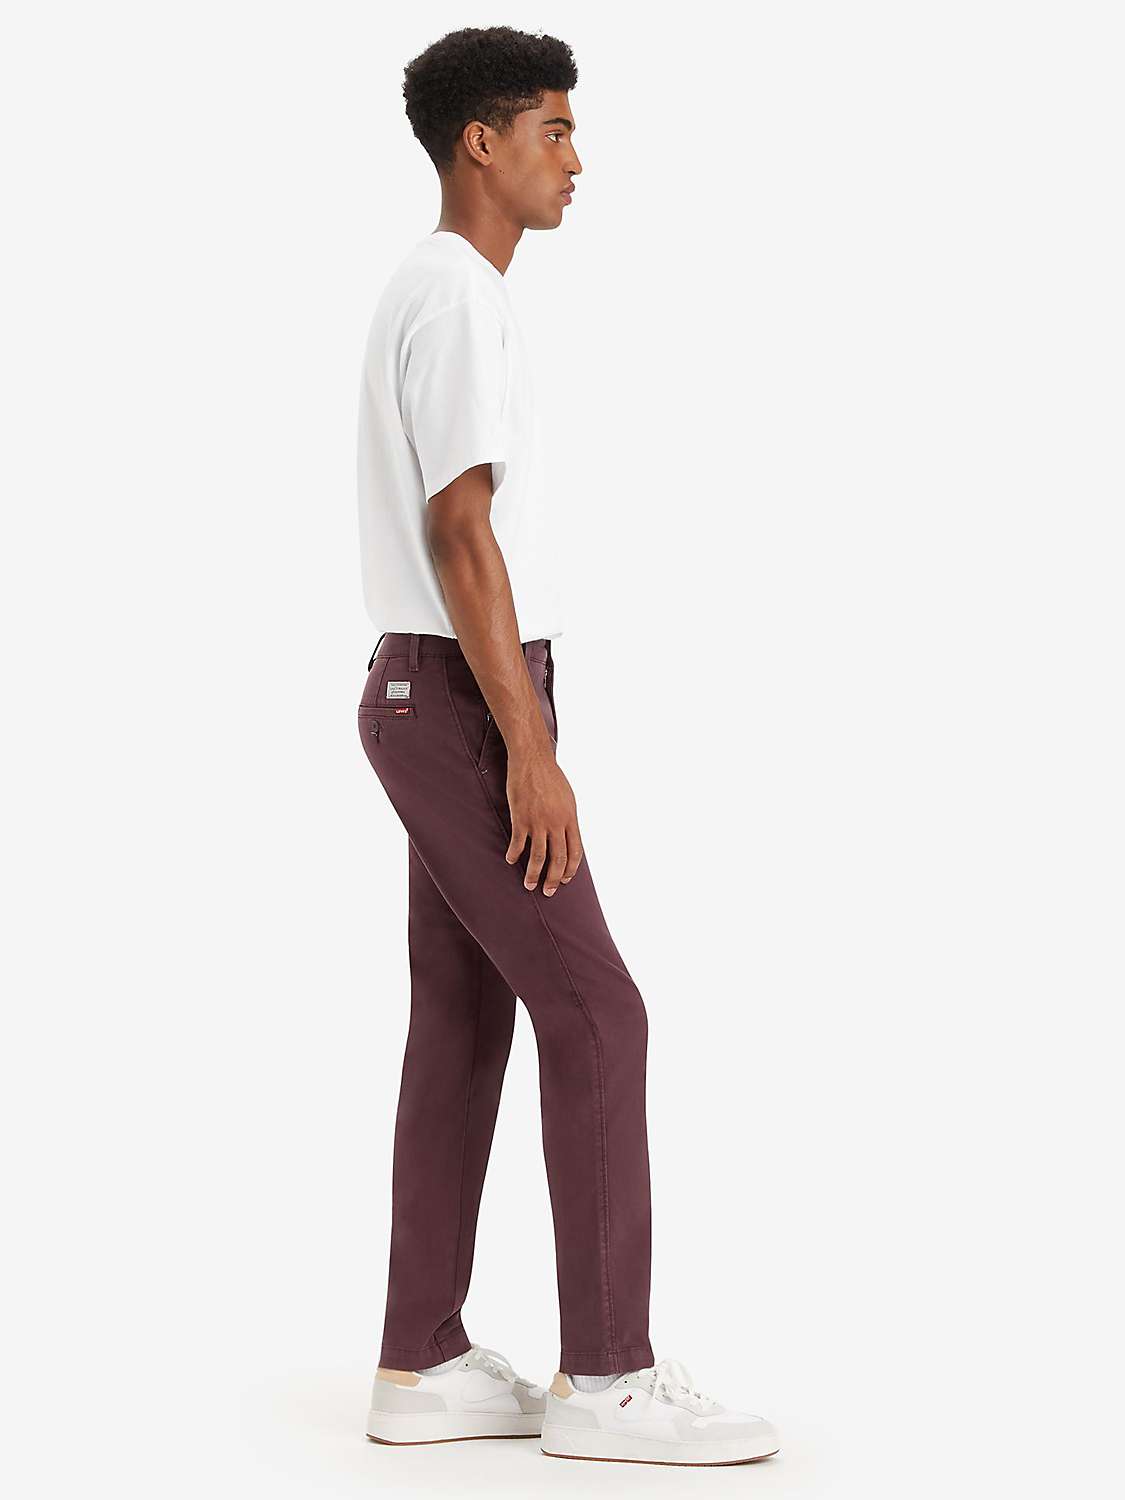 Buy Levi's XX Chino Standard Taper Trousers, Red Online at johnlewis.com